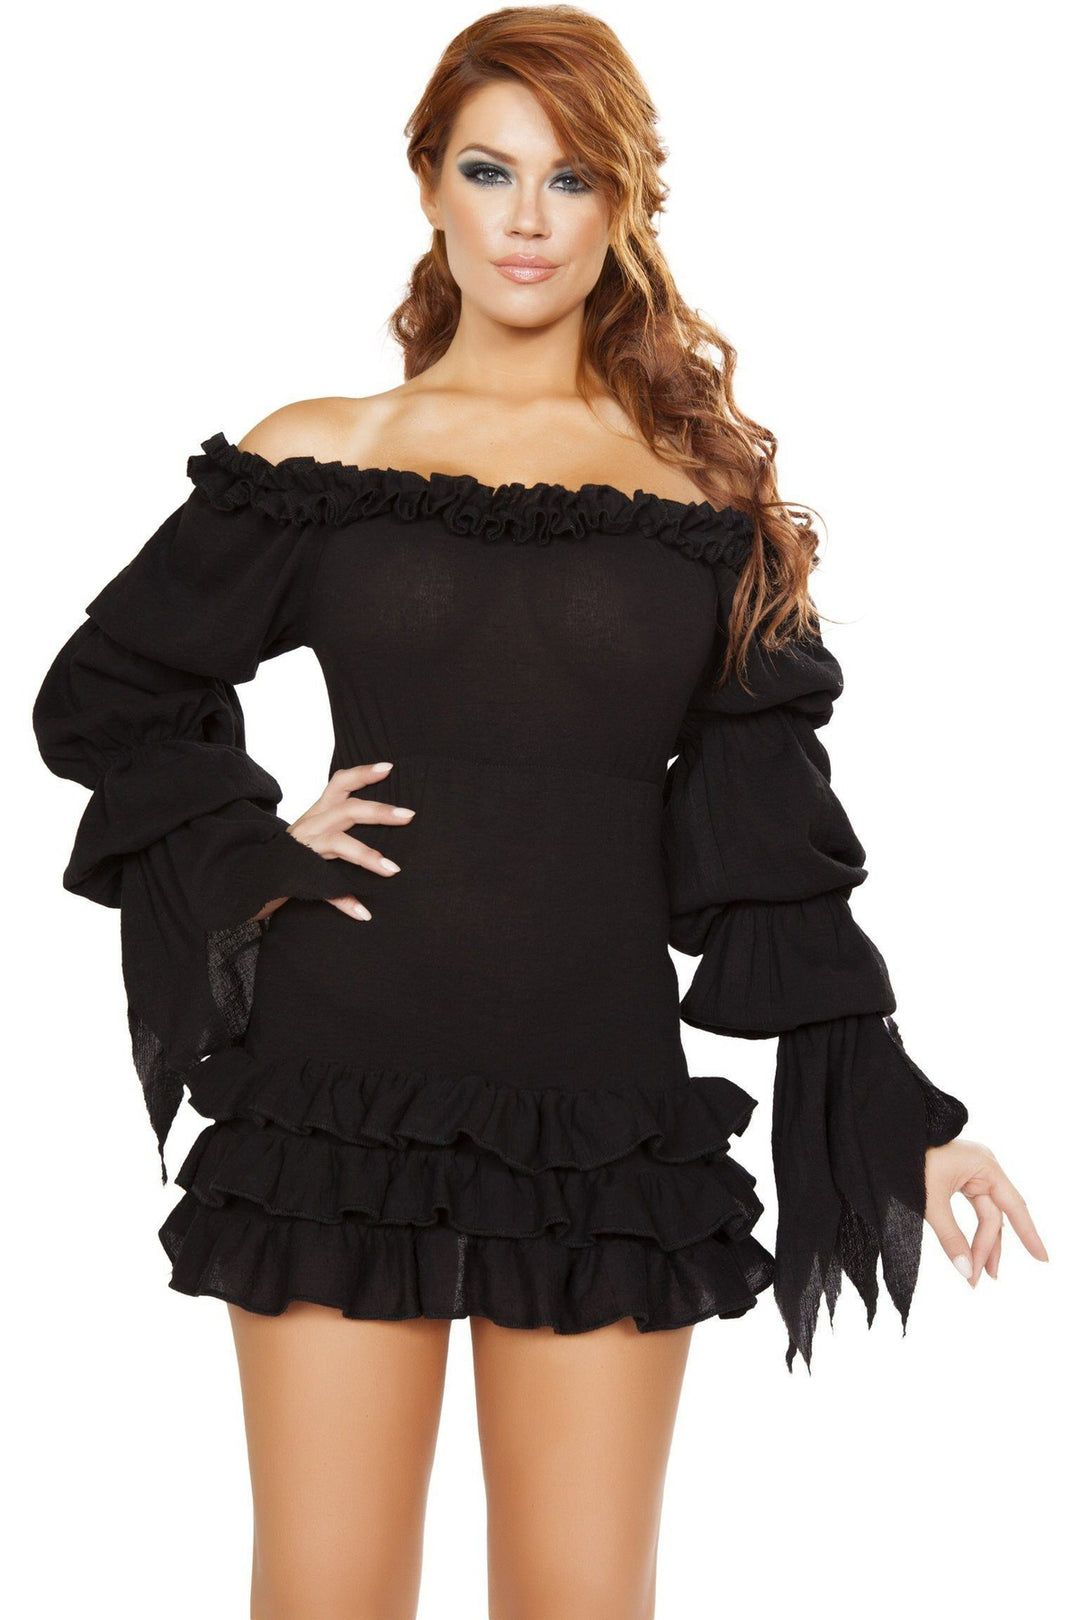 Roma Ruffled Pirate Dress with Sleeves & Multi Layered Skirt Costume-SEXYSHOES.COM